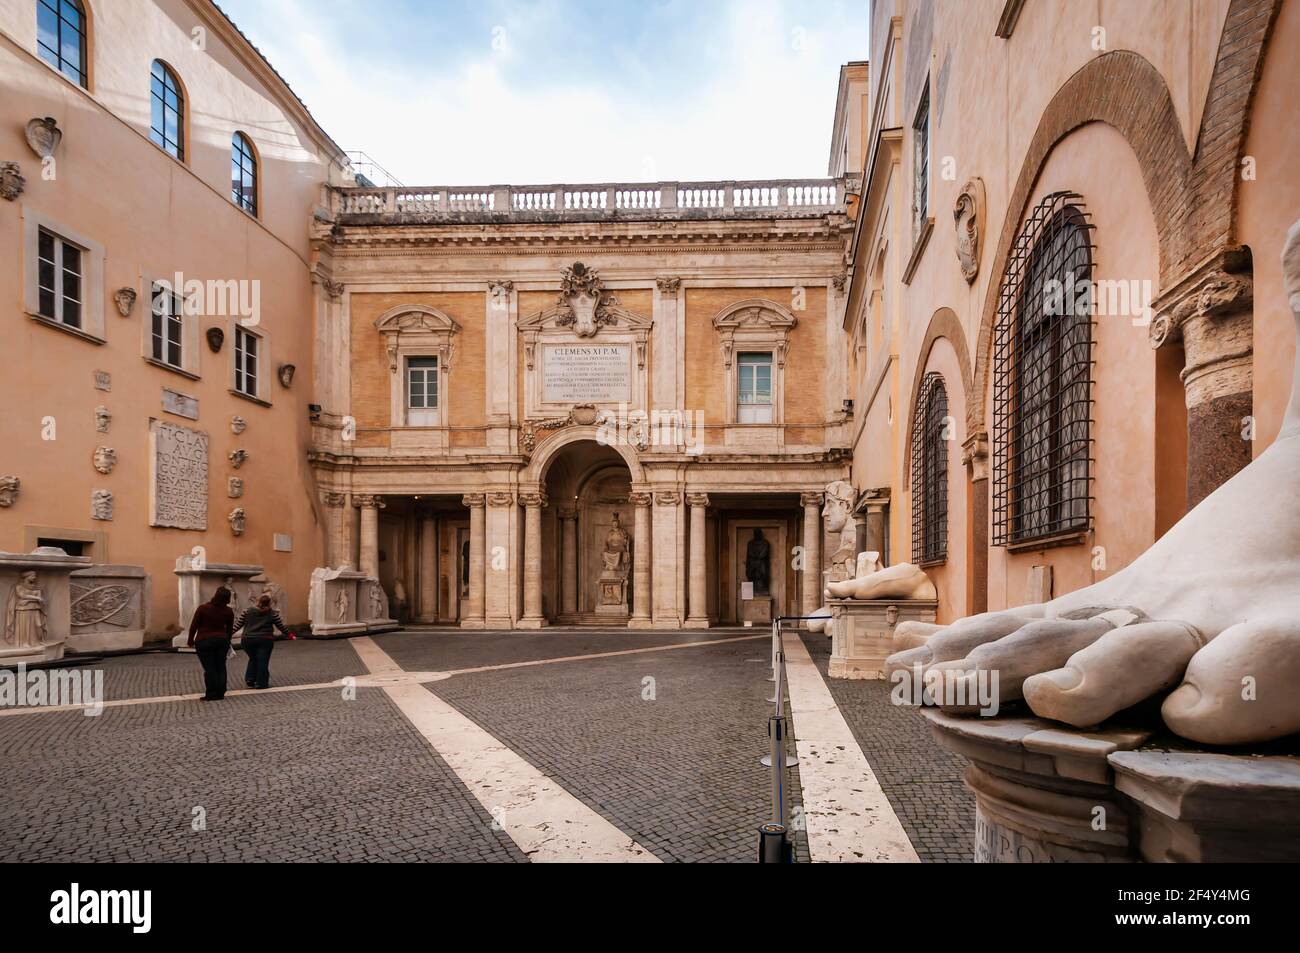 Colossal statues in an interior courtyard of the Capitoline Museums in Rome in Lazio, Italy Stock Photo